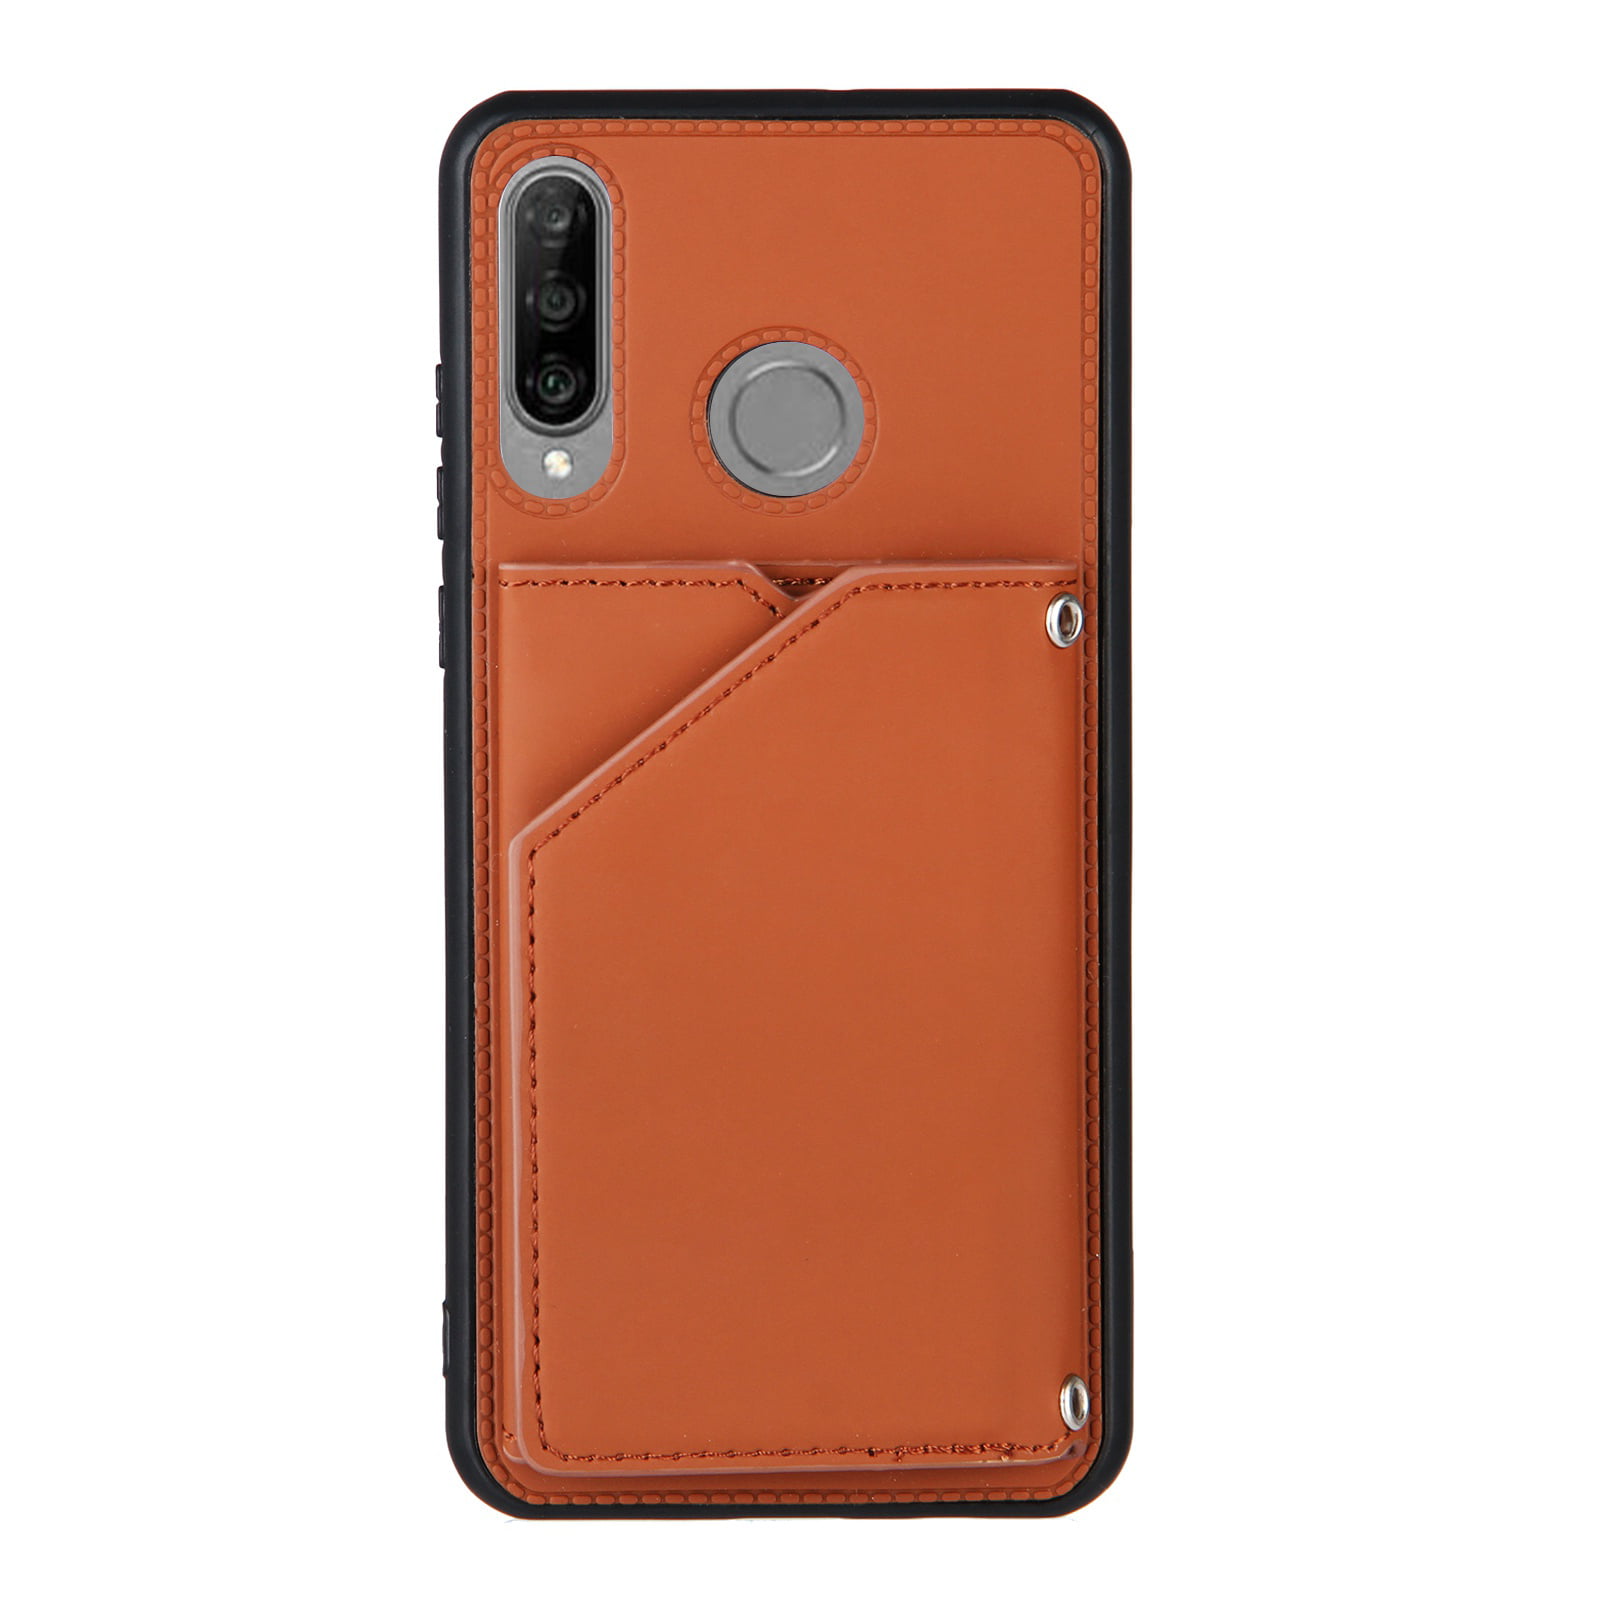 Cover for Leather Mobile Phone case Card Holders Extra-Protective Business Kickstand Flip Cover Huawei P30 LITE Flip Case 